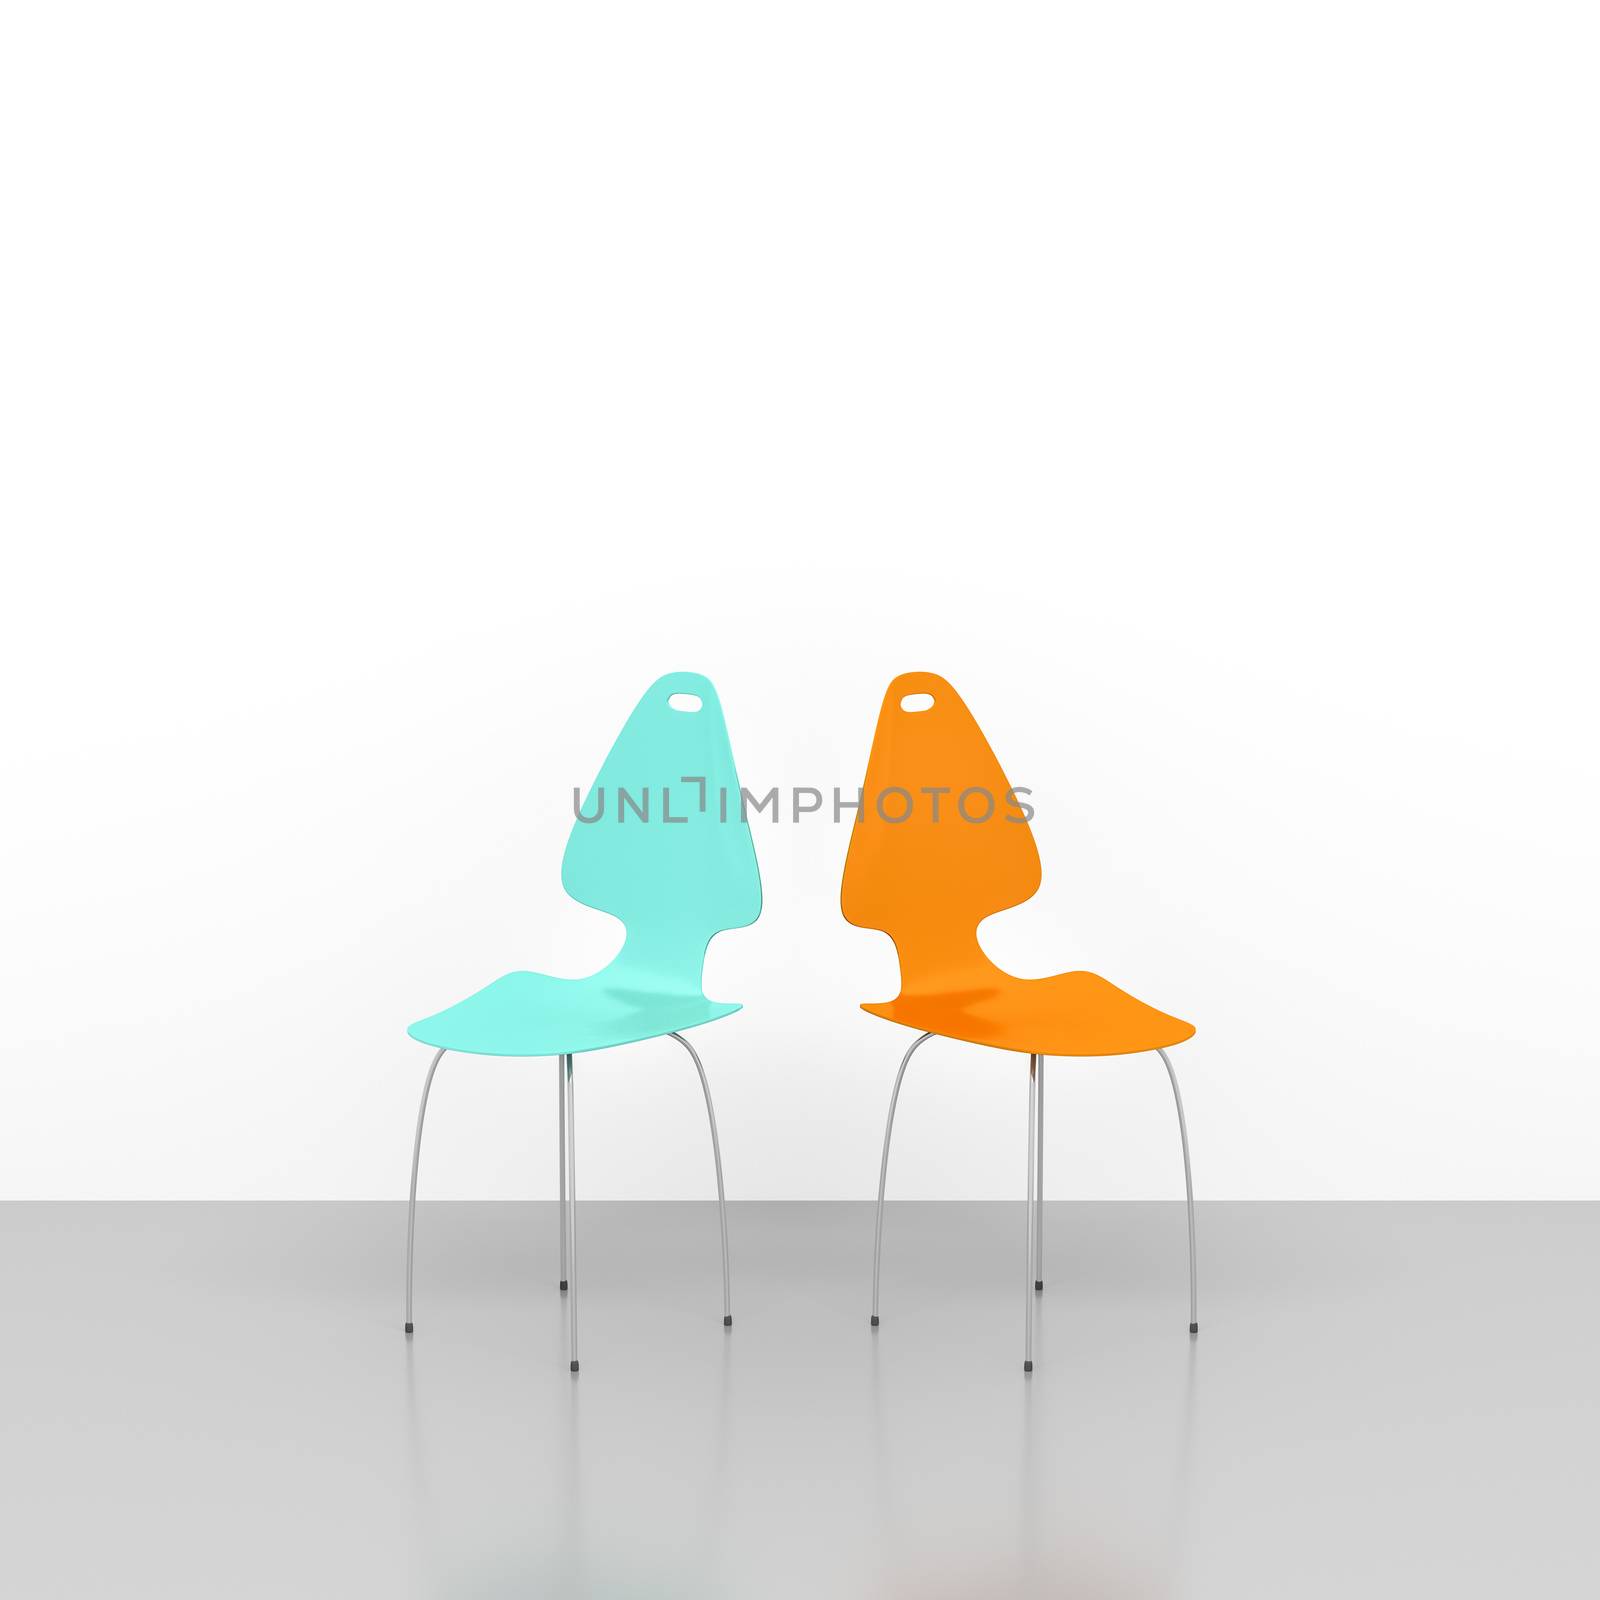 An image of two chairs in a white room